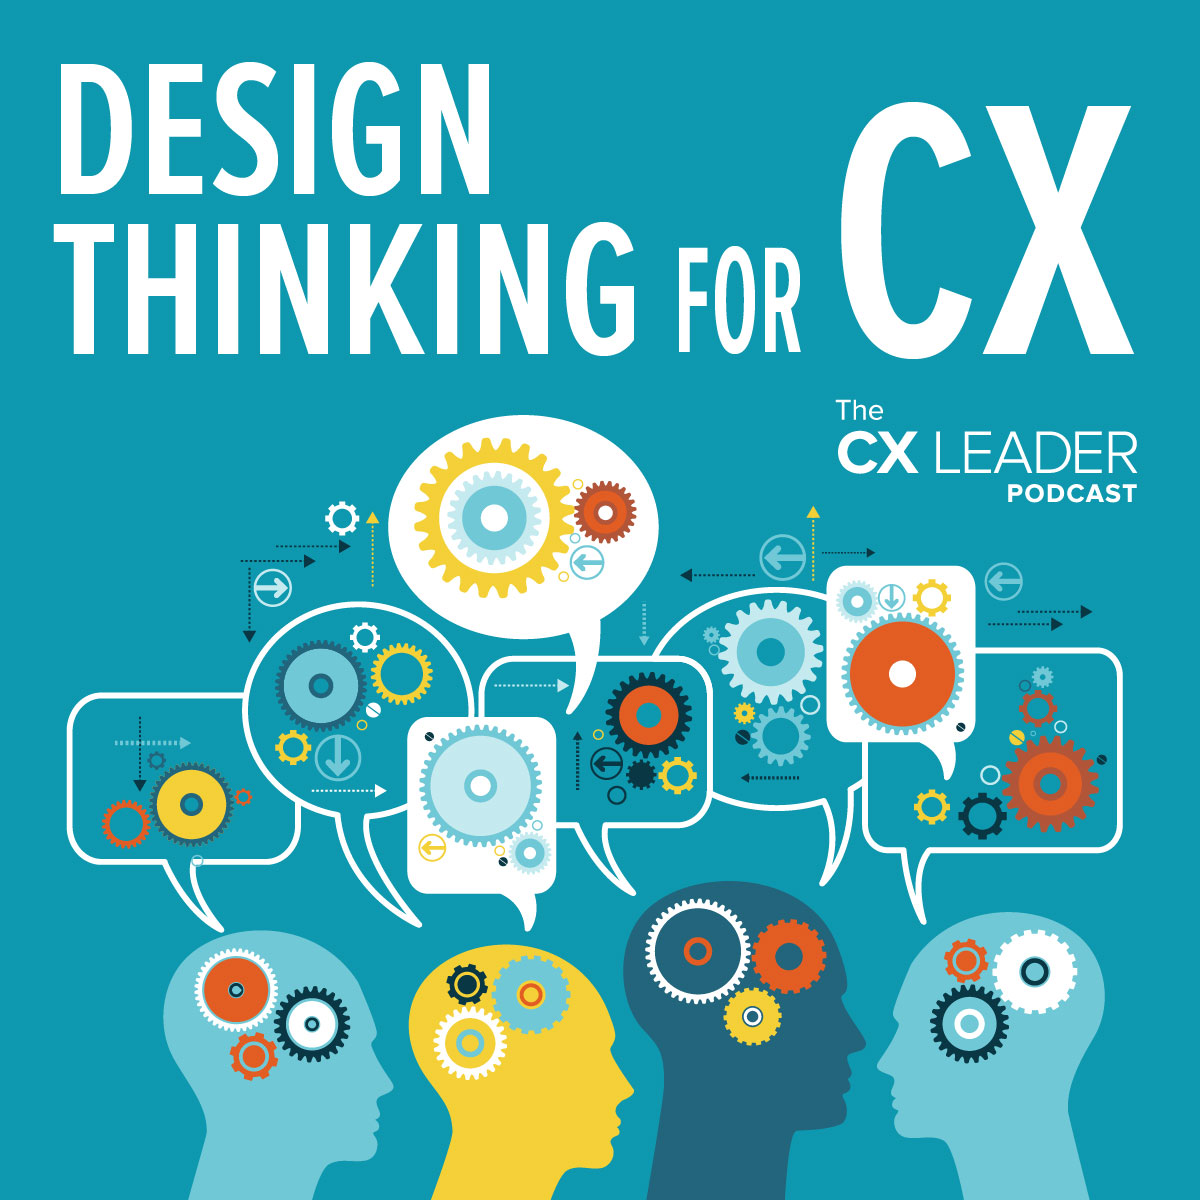 Design Thinking for CX